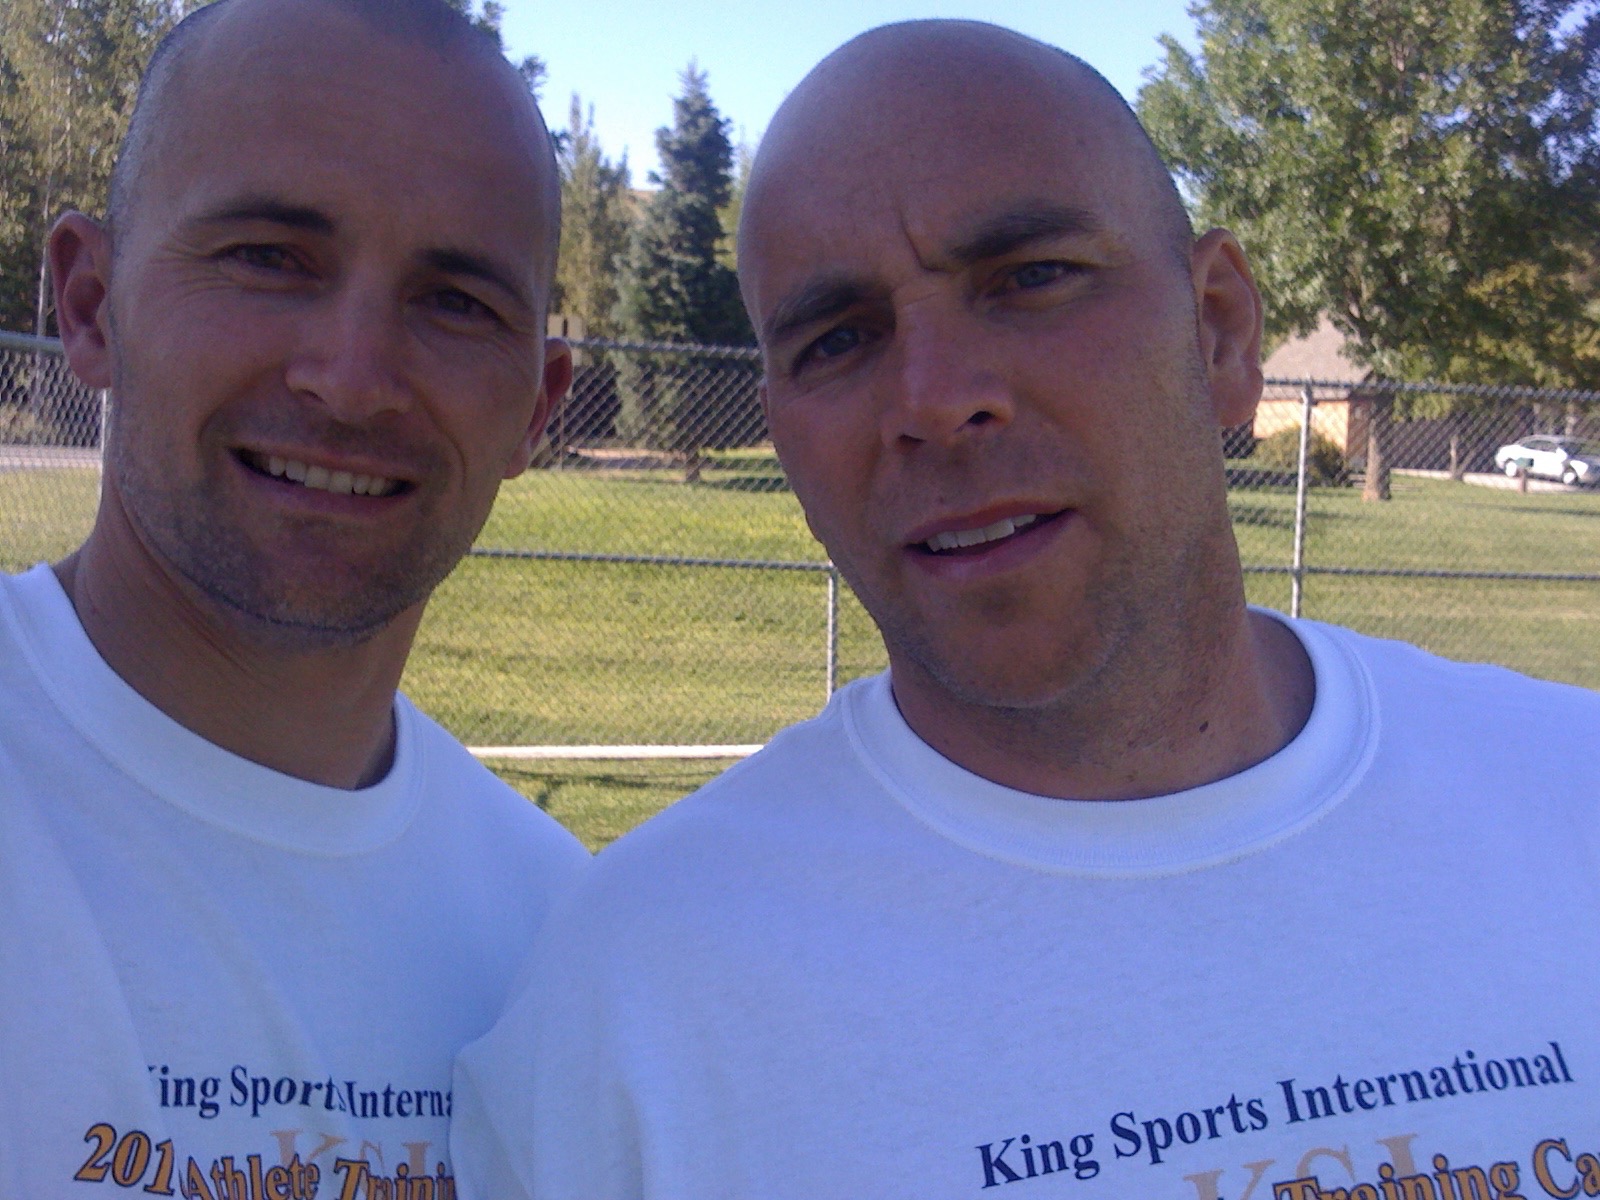 With the late great Mike Pimentel in 2010. We roomed together for over 10 years at the annual KSI coaching camps in Park City, Utah, USA. We had a blast at everyone of them. Miss you mate.   